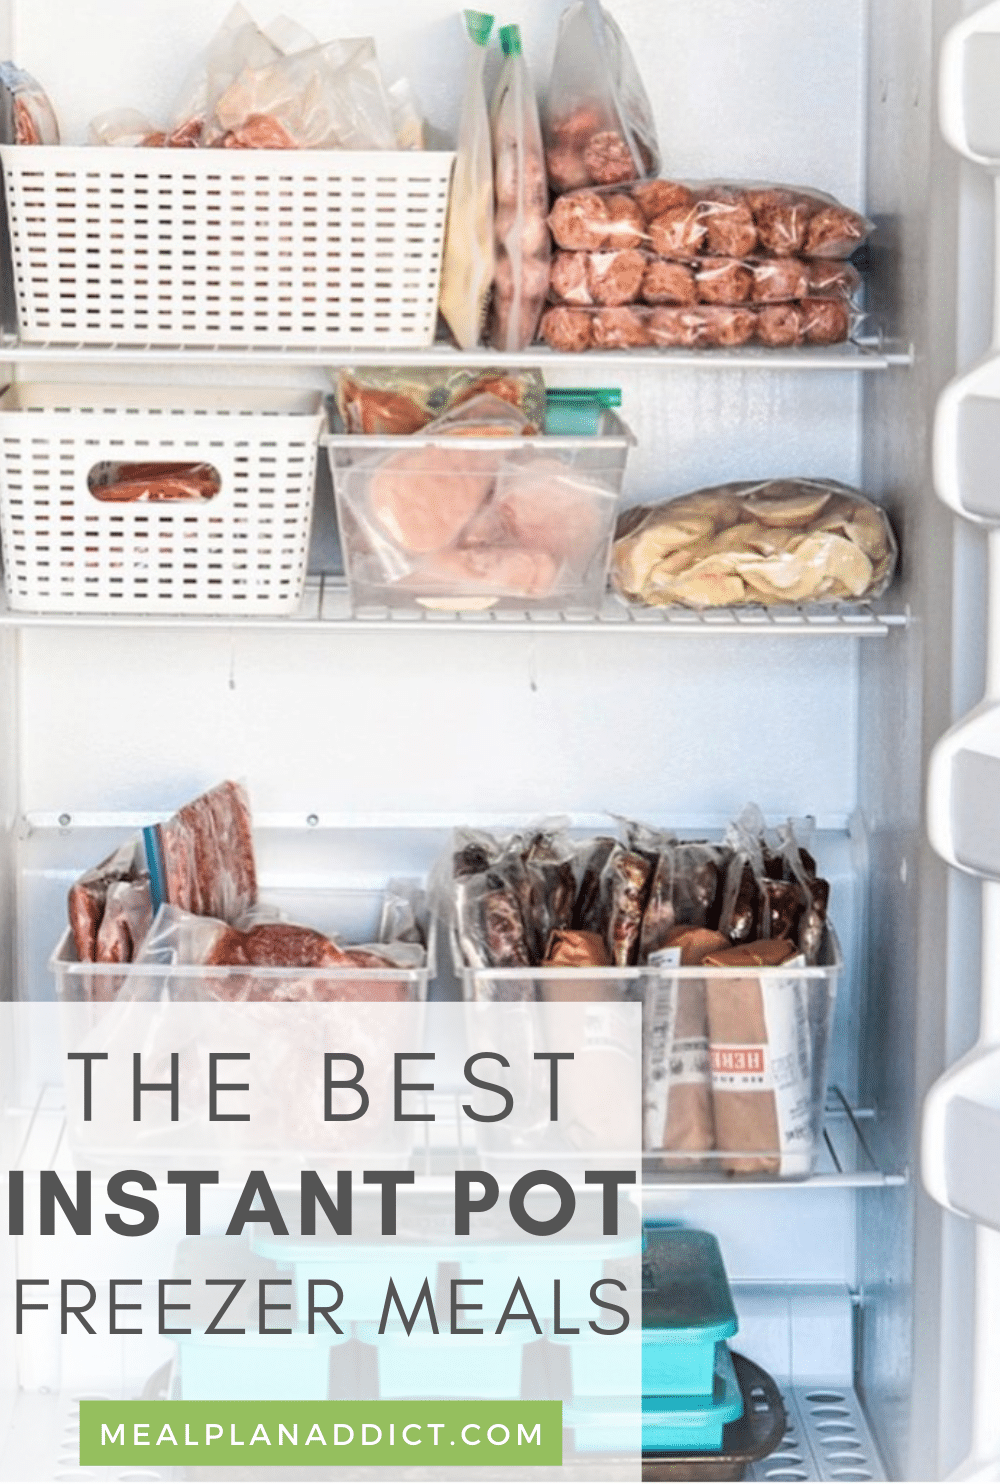 Fill Your Freezer with These Instant Pot Freezer Meals